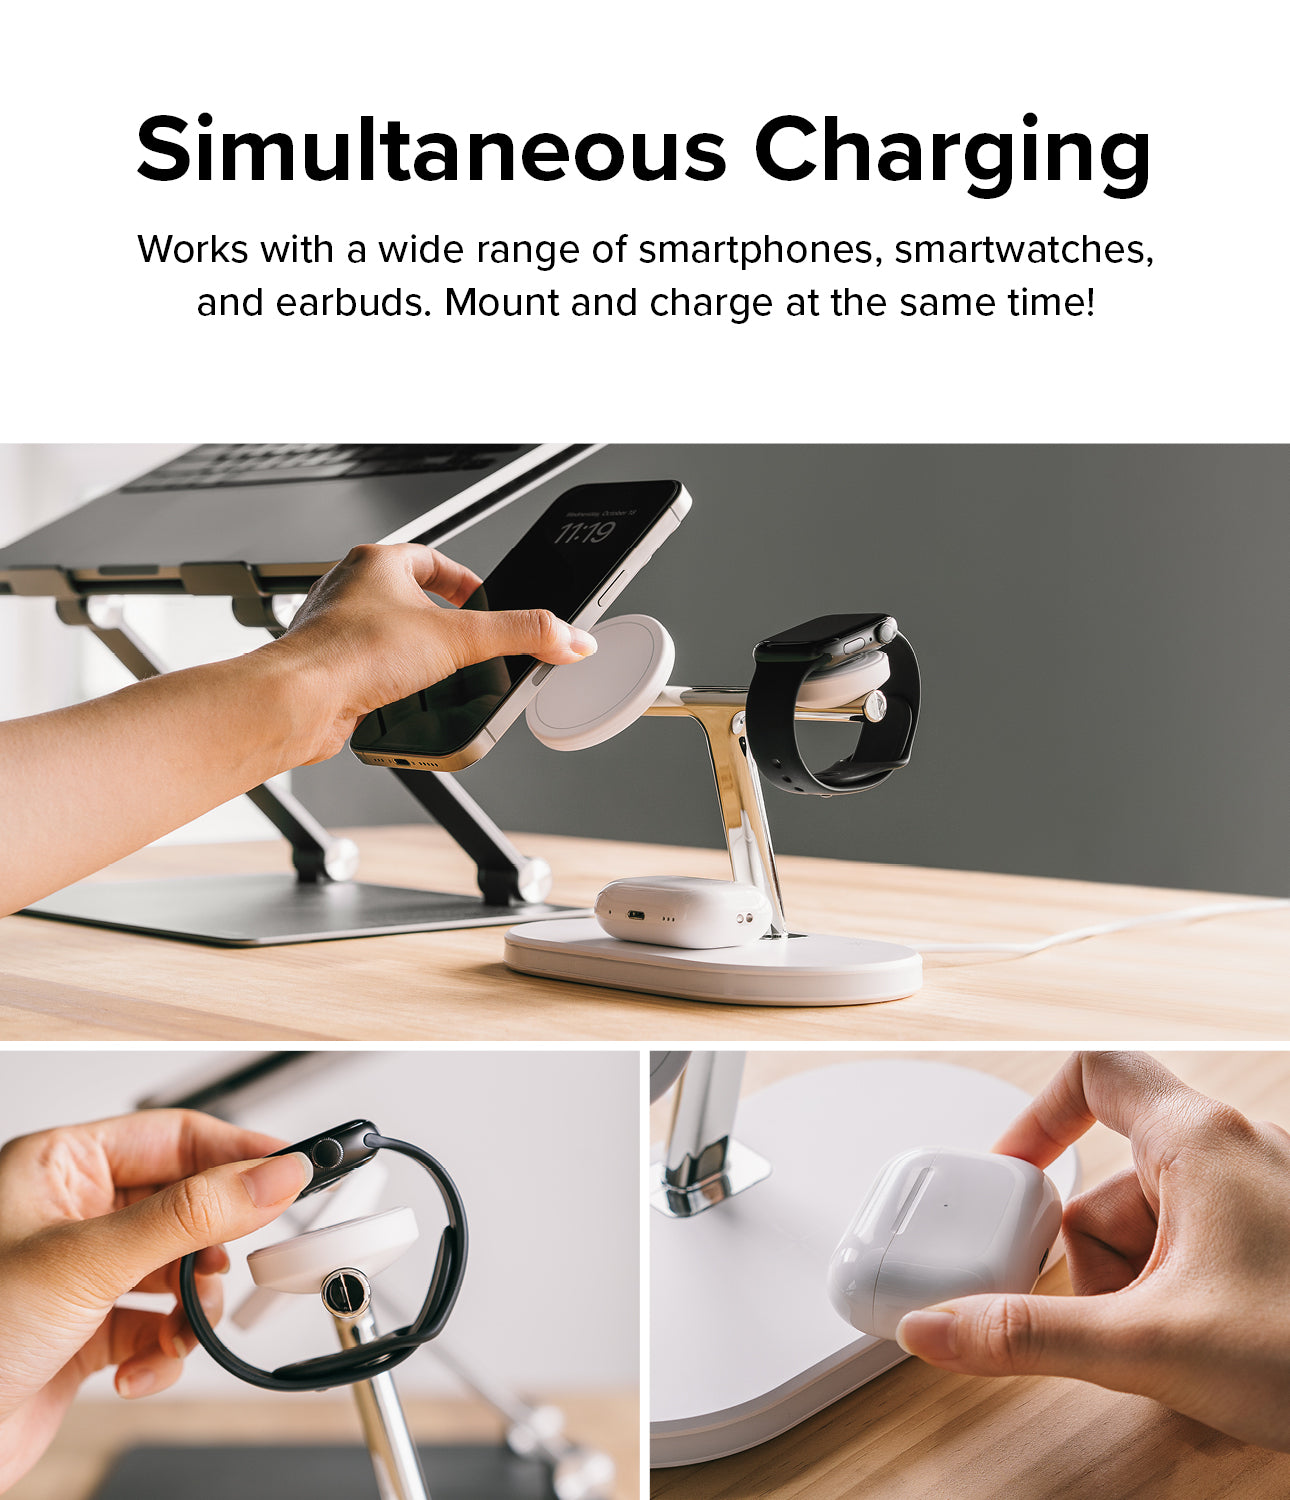 Ringke 3-in-1 Wireless Charger Stand - Simultaneous Charging. Works with a wide range of smartphones, smartwatches, and earbuds. Mount and charge at the same time!